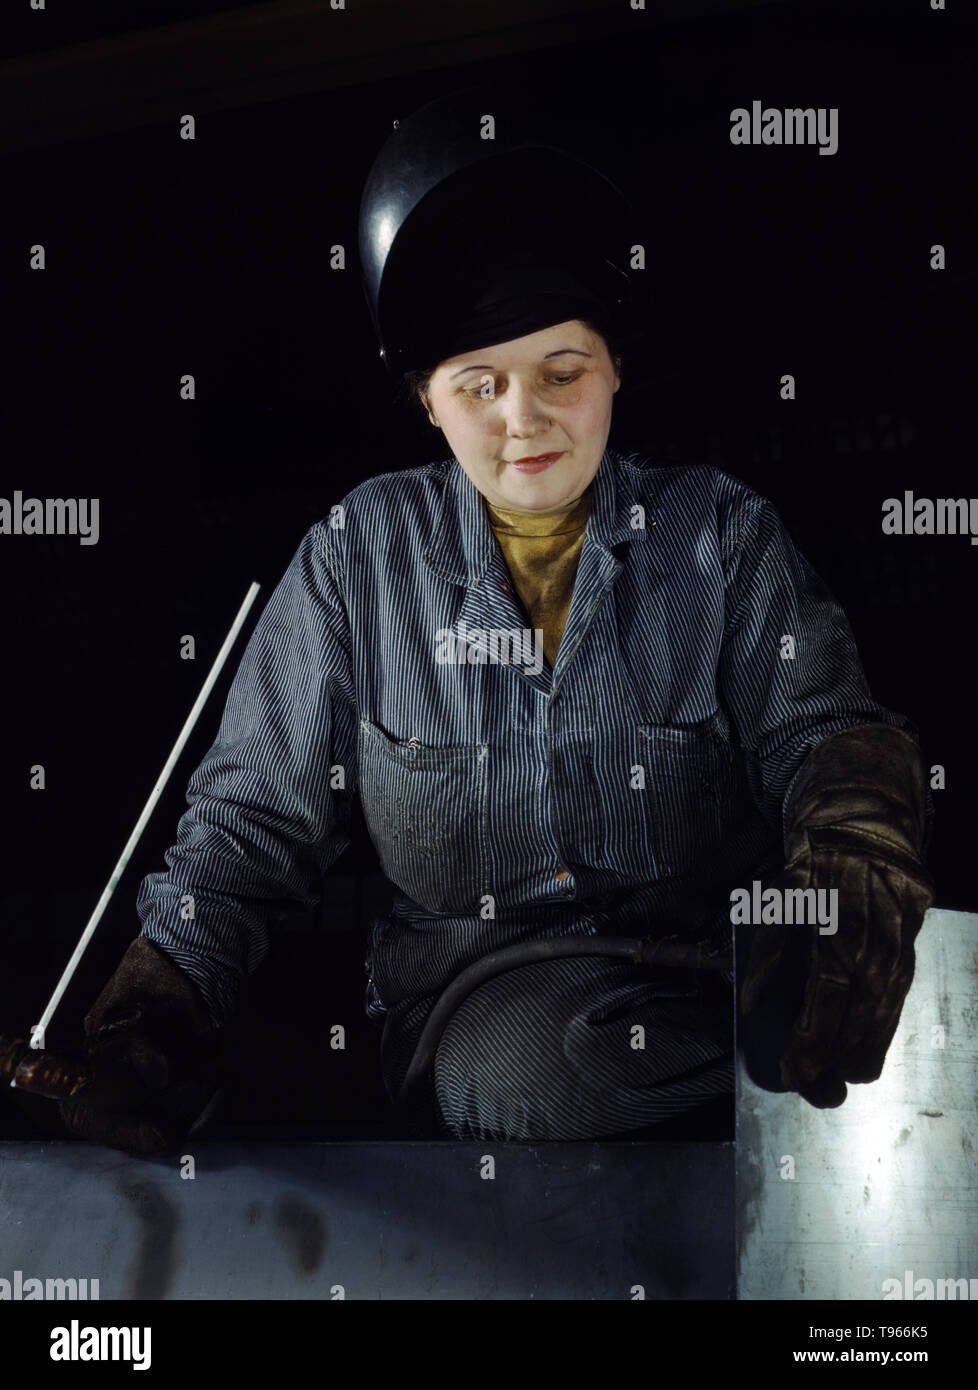 Enola O'Connell, age 32, widow and mother of one child. Ex-housewife, now she is the only woman welder at Heil and Company, Milwaukee, Wisconsin. Although the image of 'Rosie the Riveter' reflected the industrial work of welders and riveters, the majority of working women filled non-factory positions in every sector of the economy. What unified the experiences of these women was that they proved to themselves, and the country, that they could do a man's job and could do it well. Photographed by Howard R. Hollem, 1943. Stock Photo